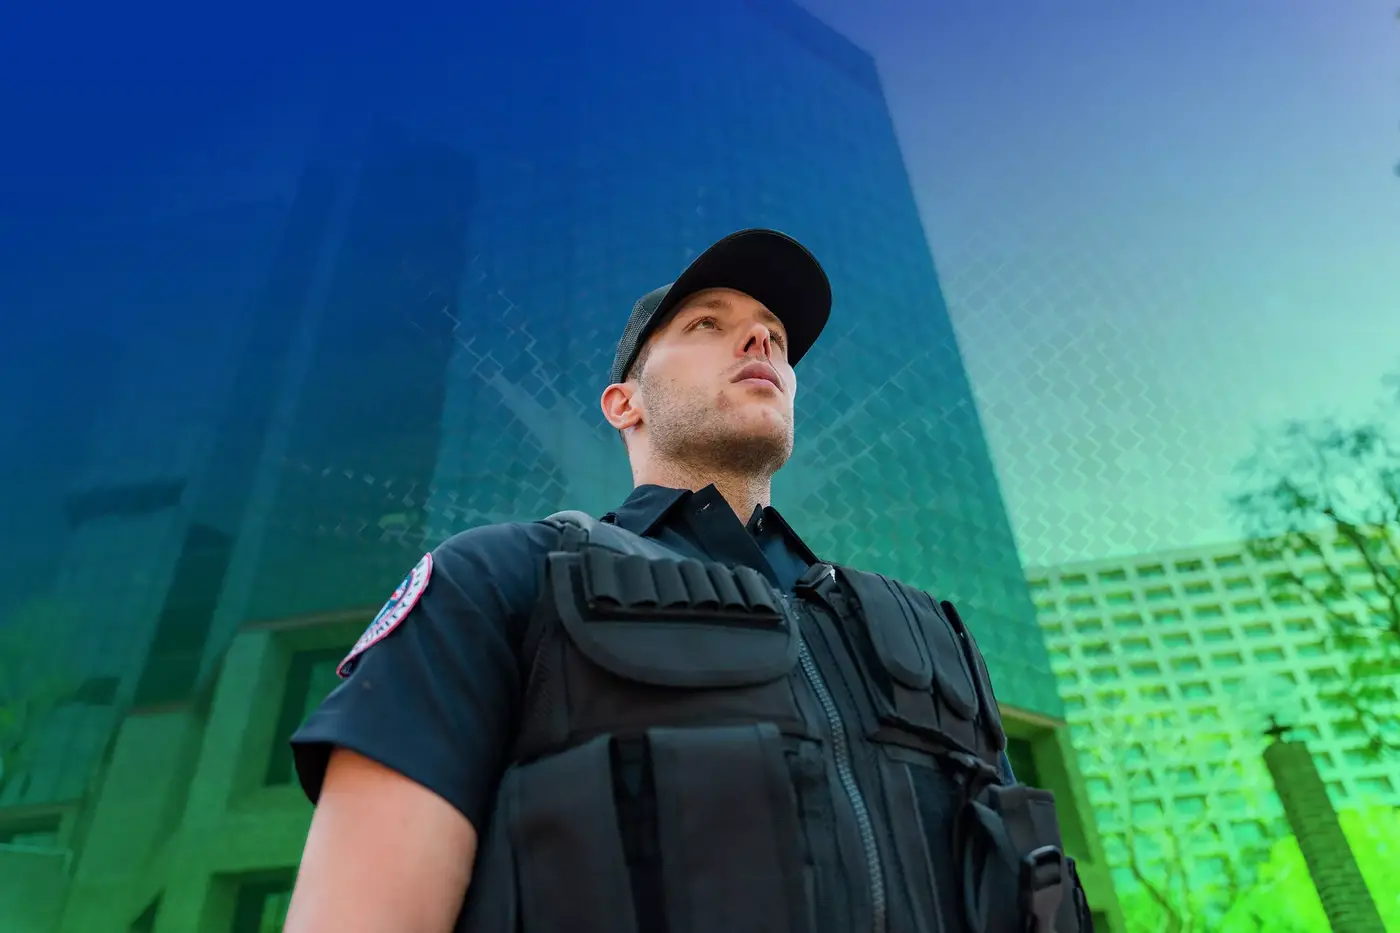 Reliable Security Guard Services in San Diego, CA